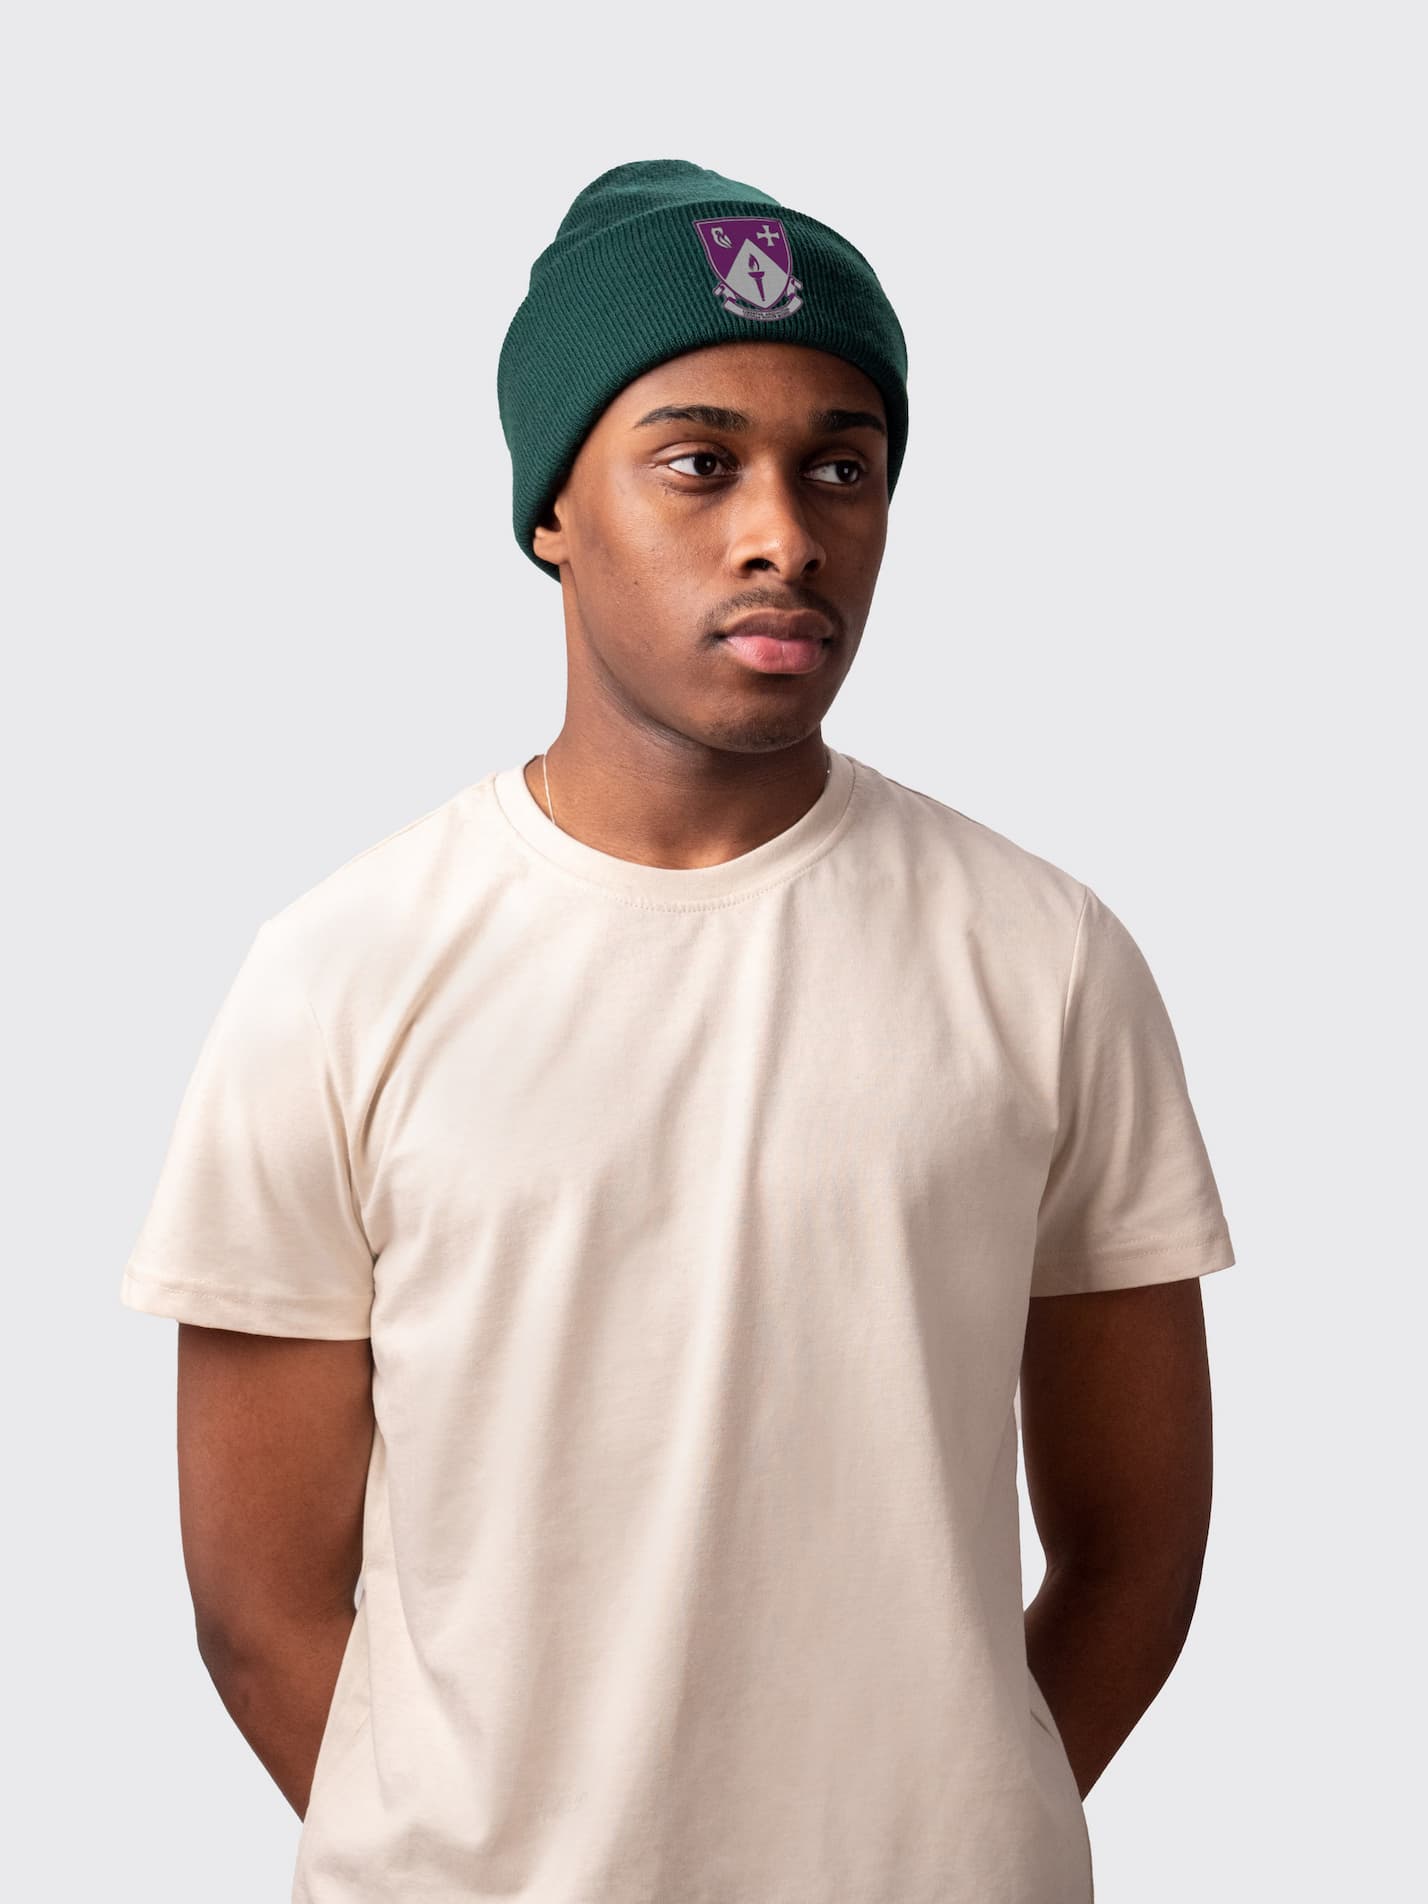 Bottle green, double layer knit beanie, made from sustainable yarn